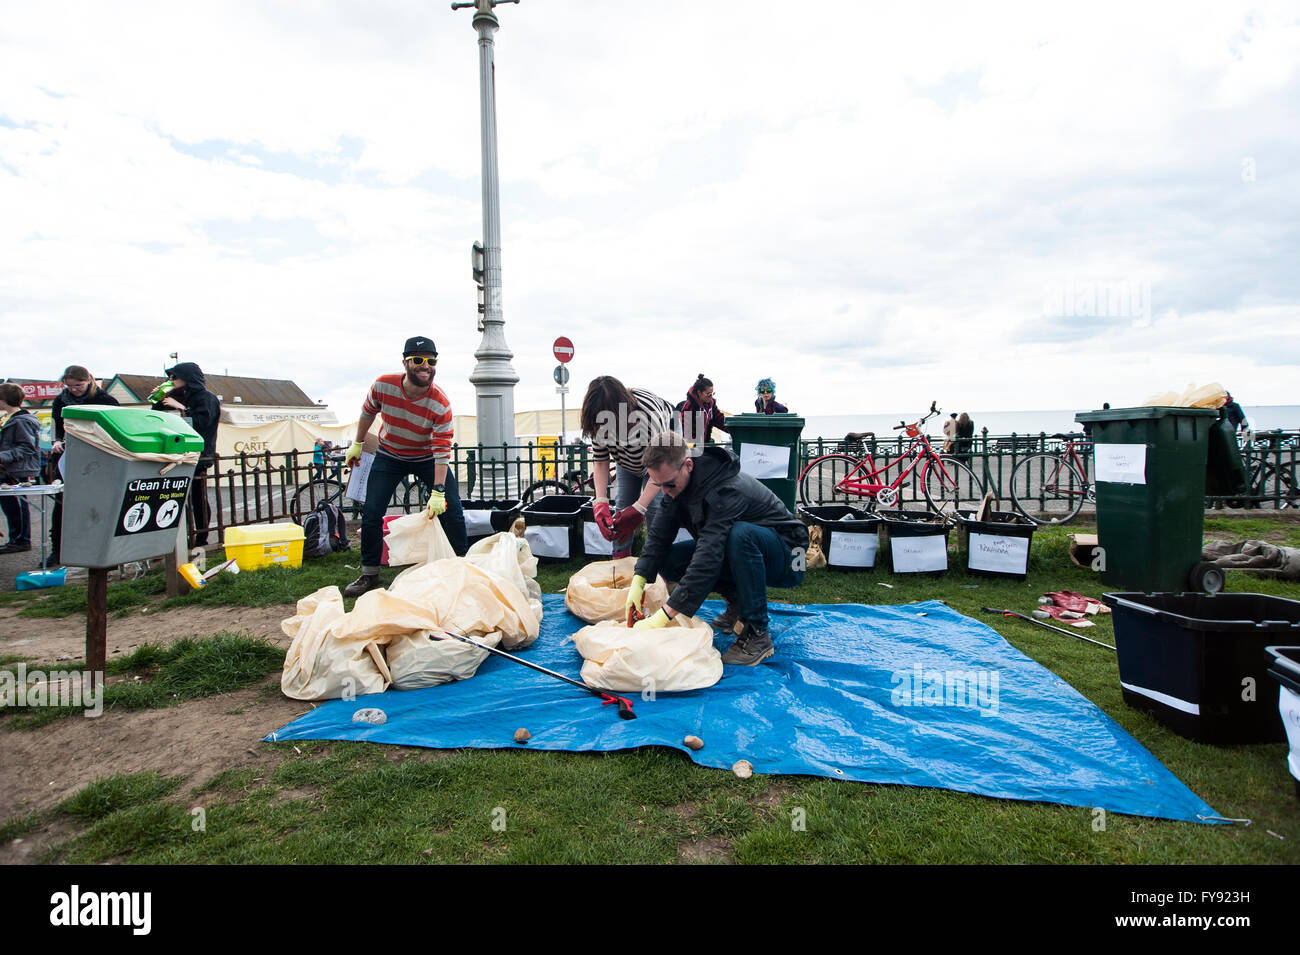 Brighton, UK. Saturday 23 April 2016. The Big Spring Beach Clean, organised by Surfers Against Sewage, Zero Waste Brighton and The Deans Beach & Environment Volunteers, have seen over 150 people turn out to partake in their biannual beach clean-up. One of the issues highlighted this year are the deposits of palm oil and paraffin by ships in the English Channel. The waste, as seen in pink bucket, has washed up on Sussex beaches and it's ingestion is harmful to dogs and children. Credit:  Francesca Moore/Alamy Live News Stock Photo